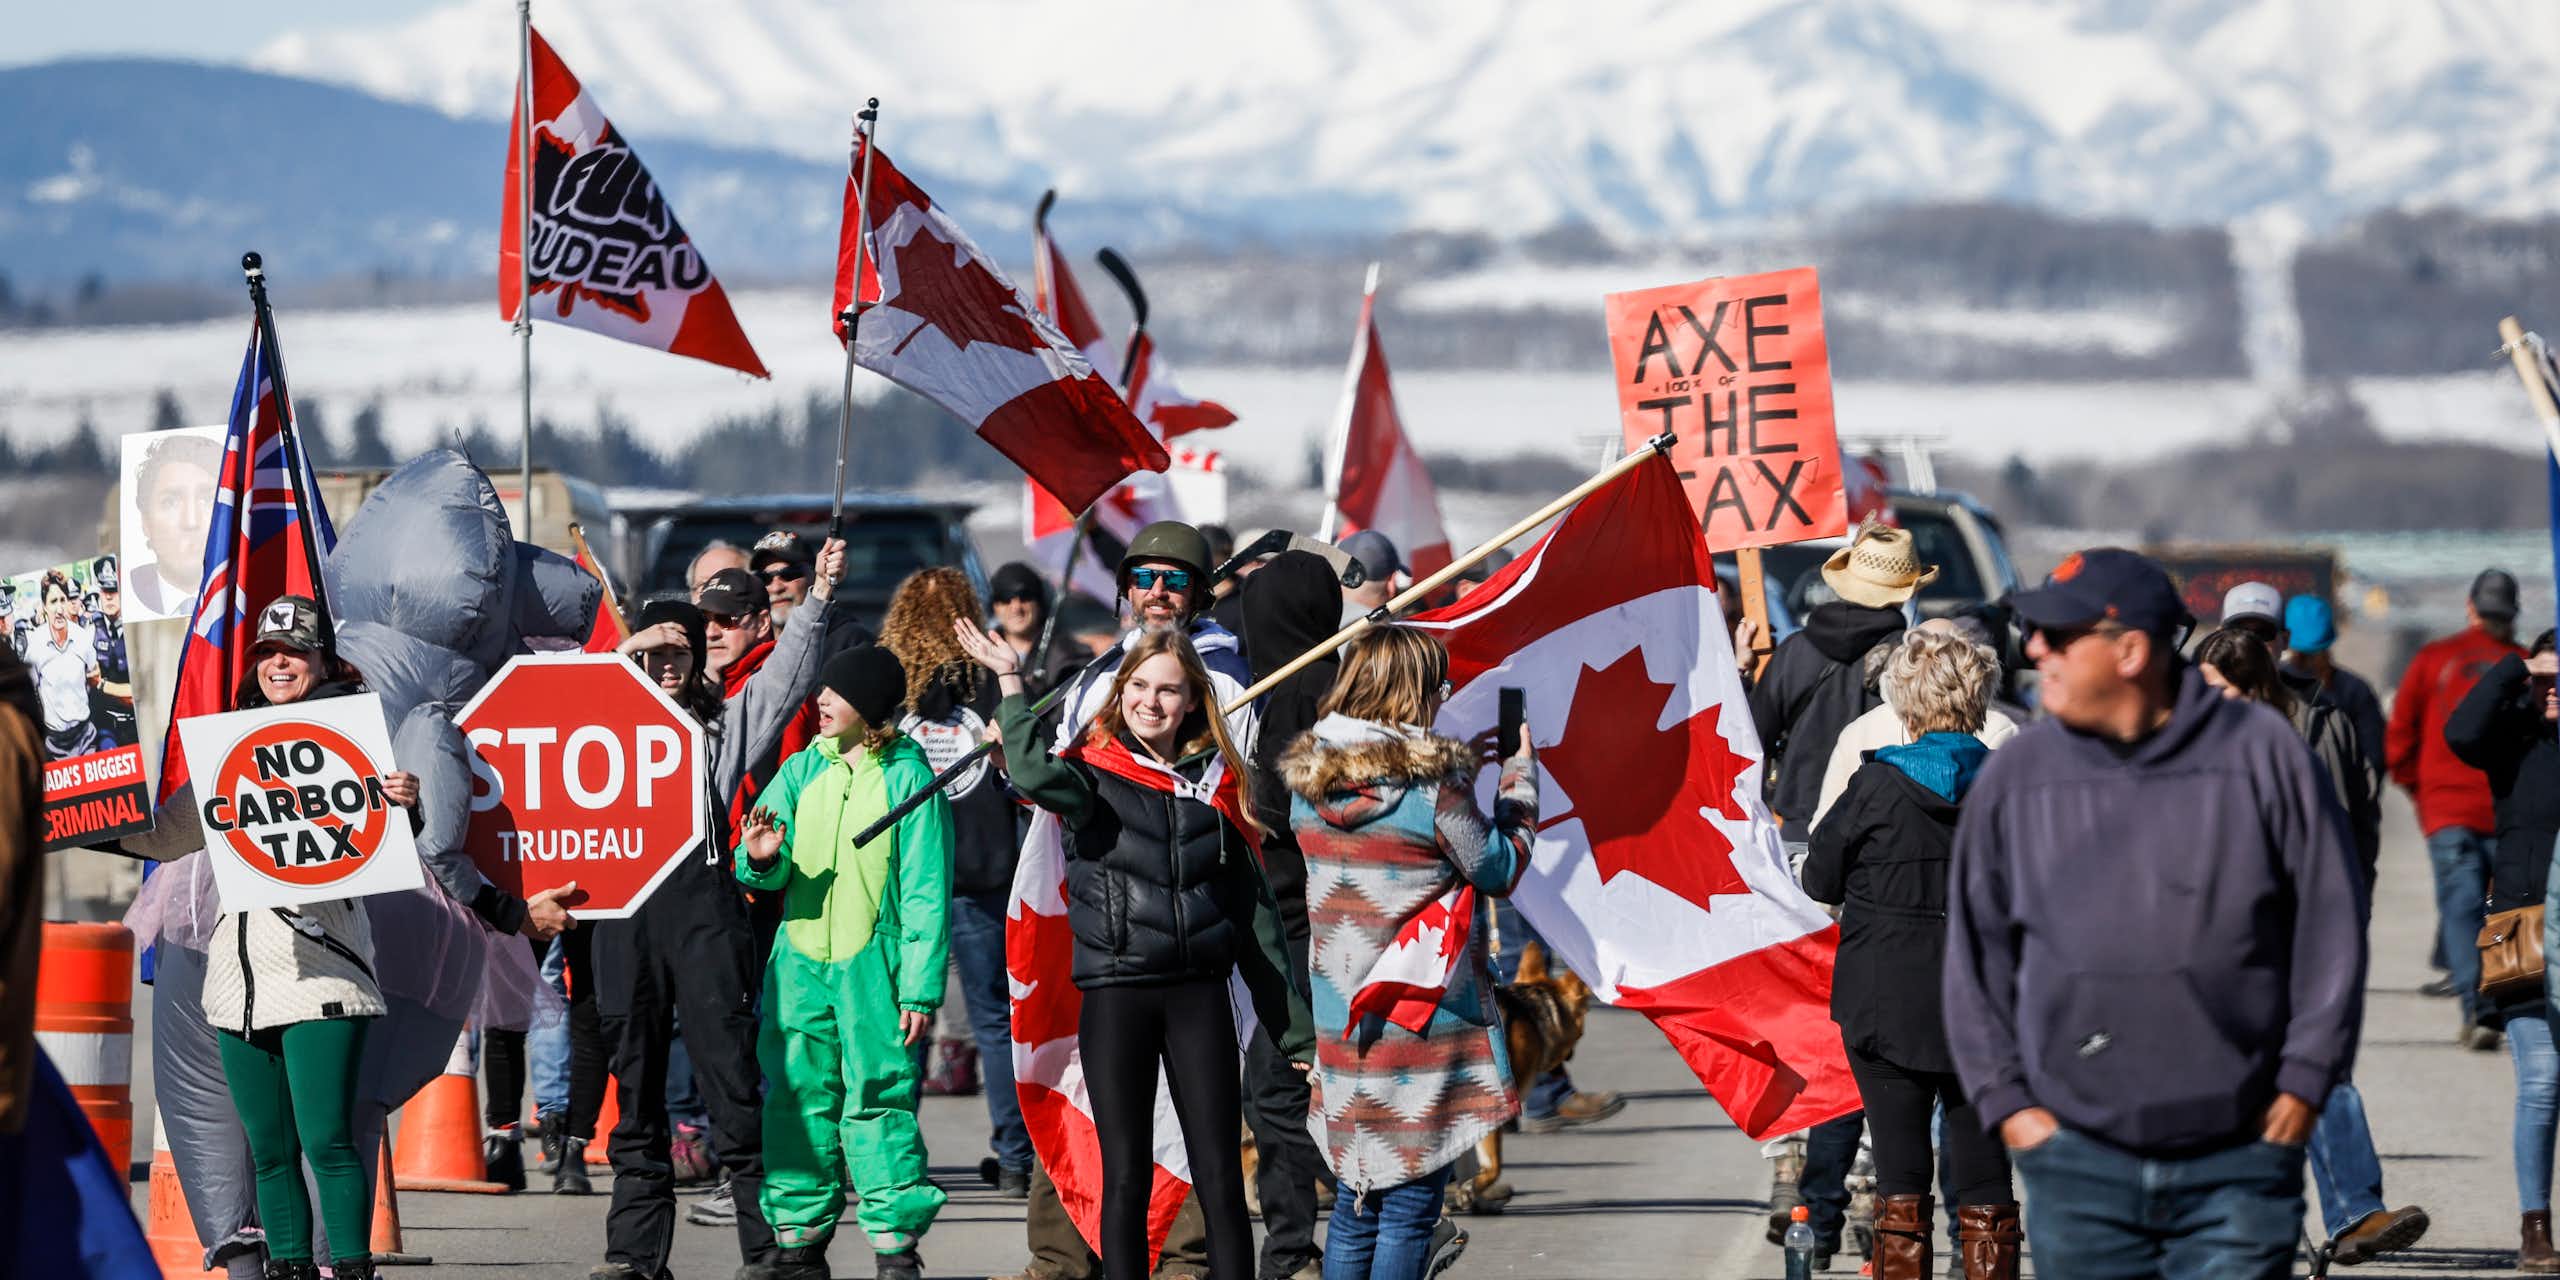 A group of people holding signs and flags walk down the road.